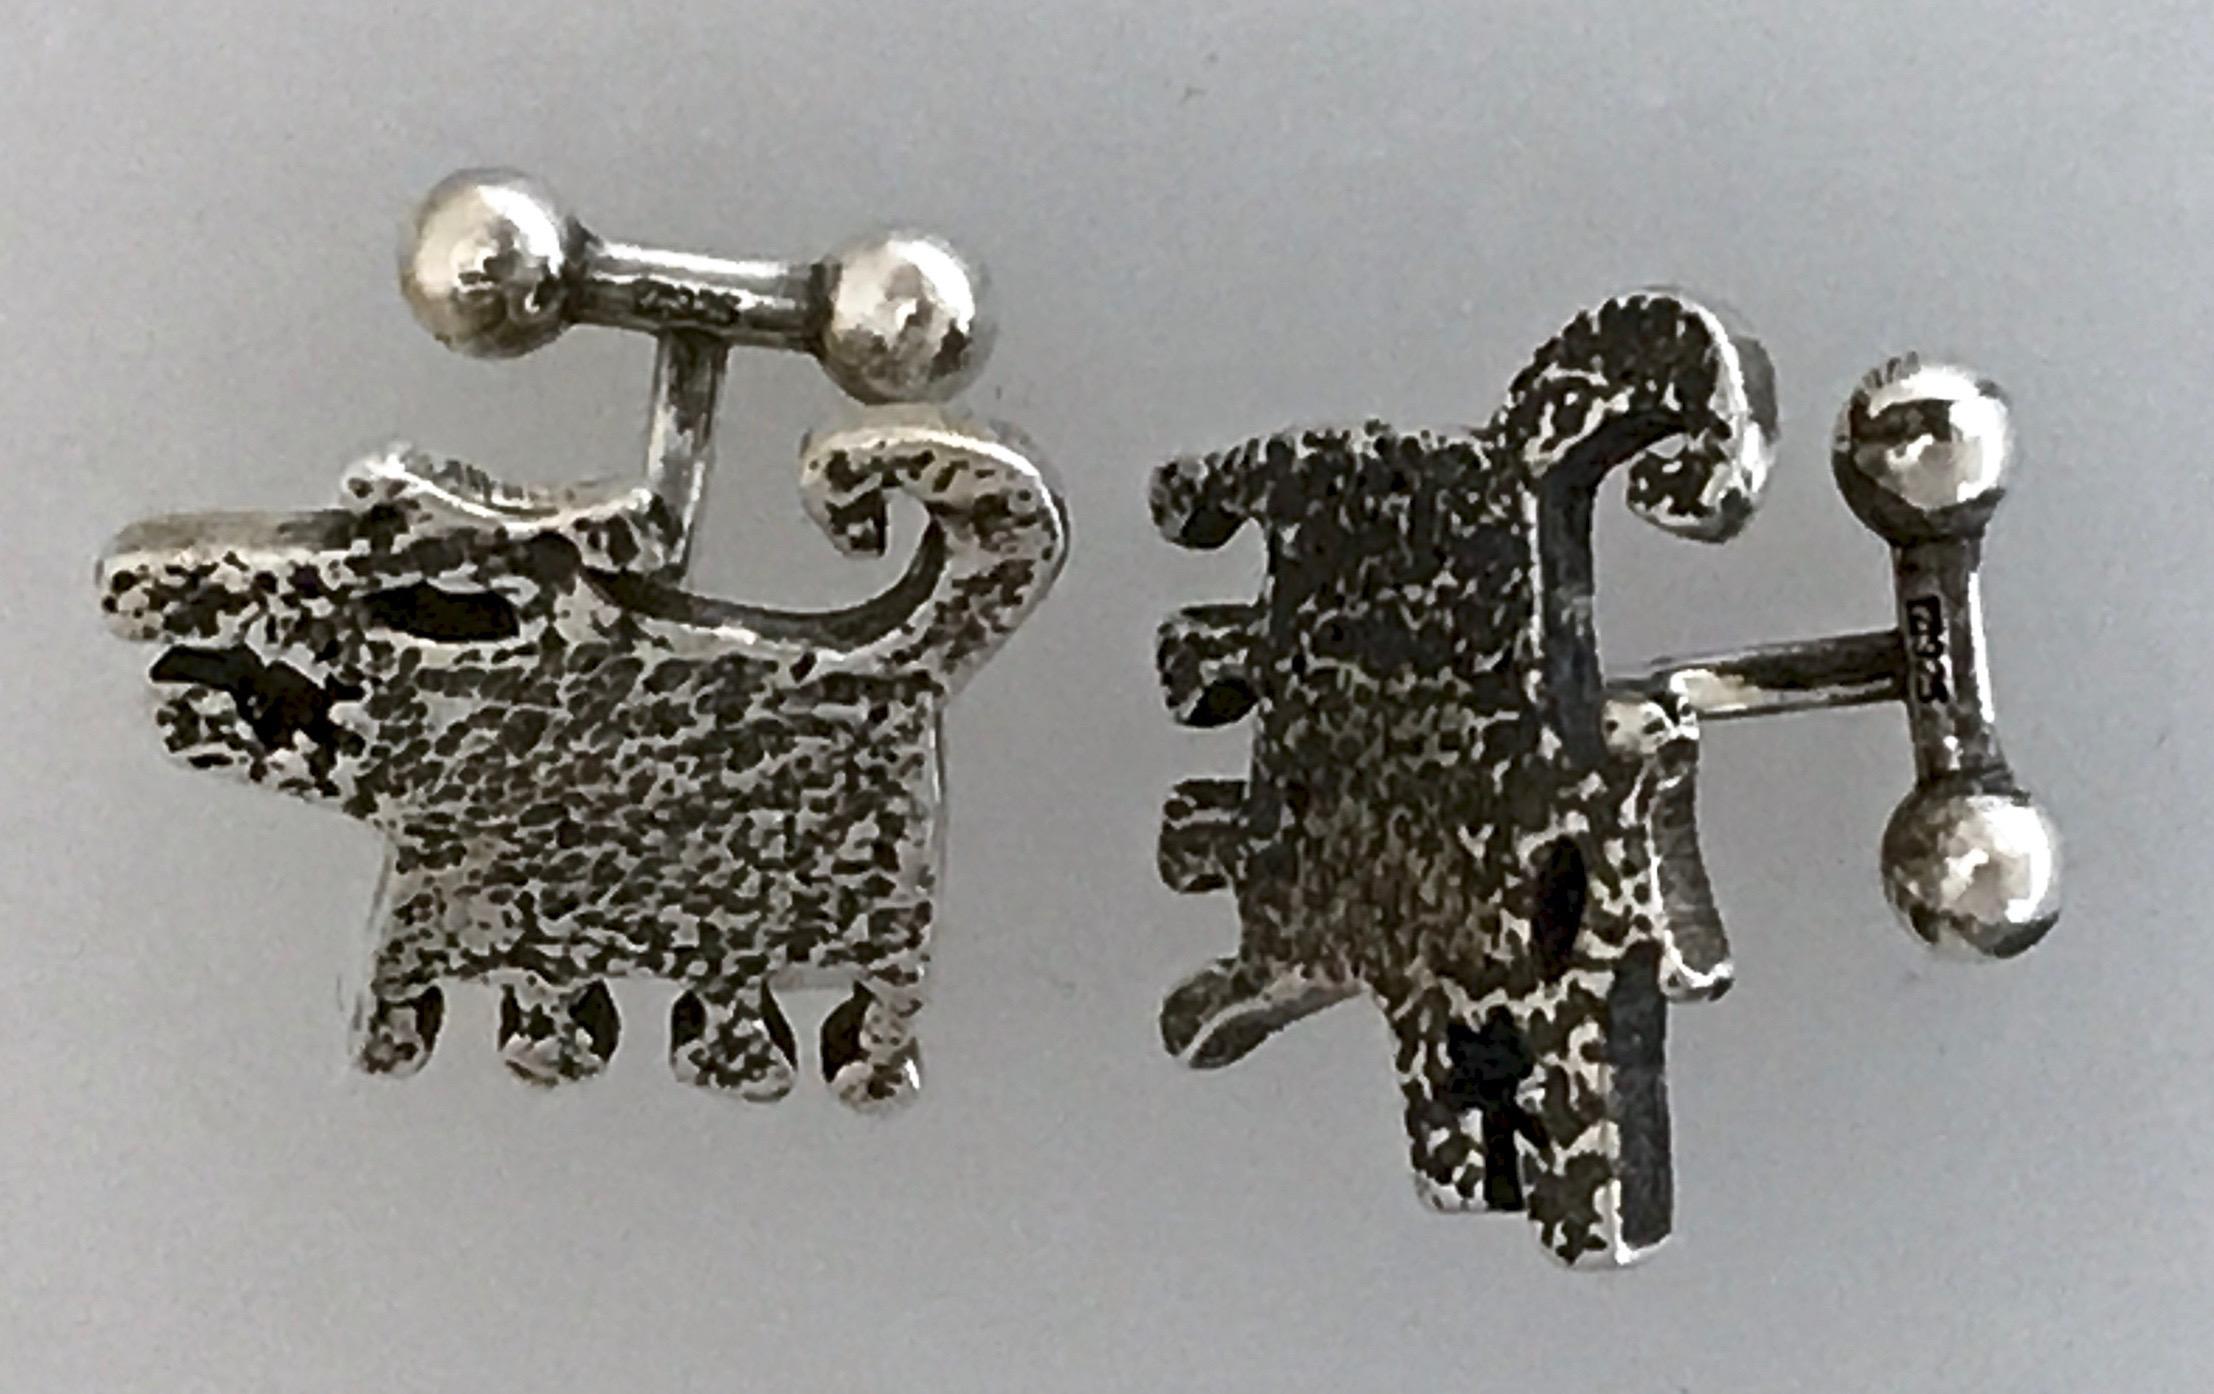 Women's or Men's Rez Dog cuff links, cast sterling silver, small dogs, Navajo, contemporary